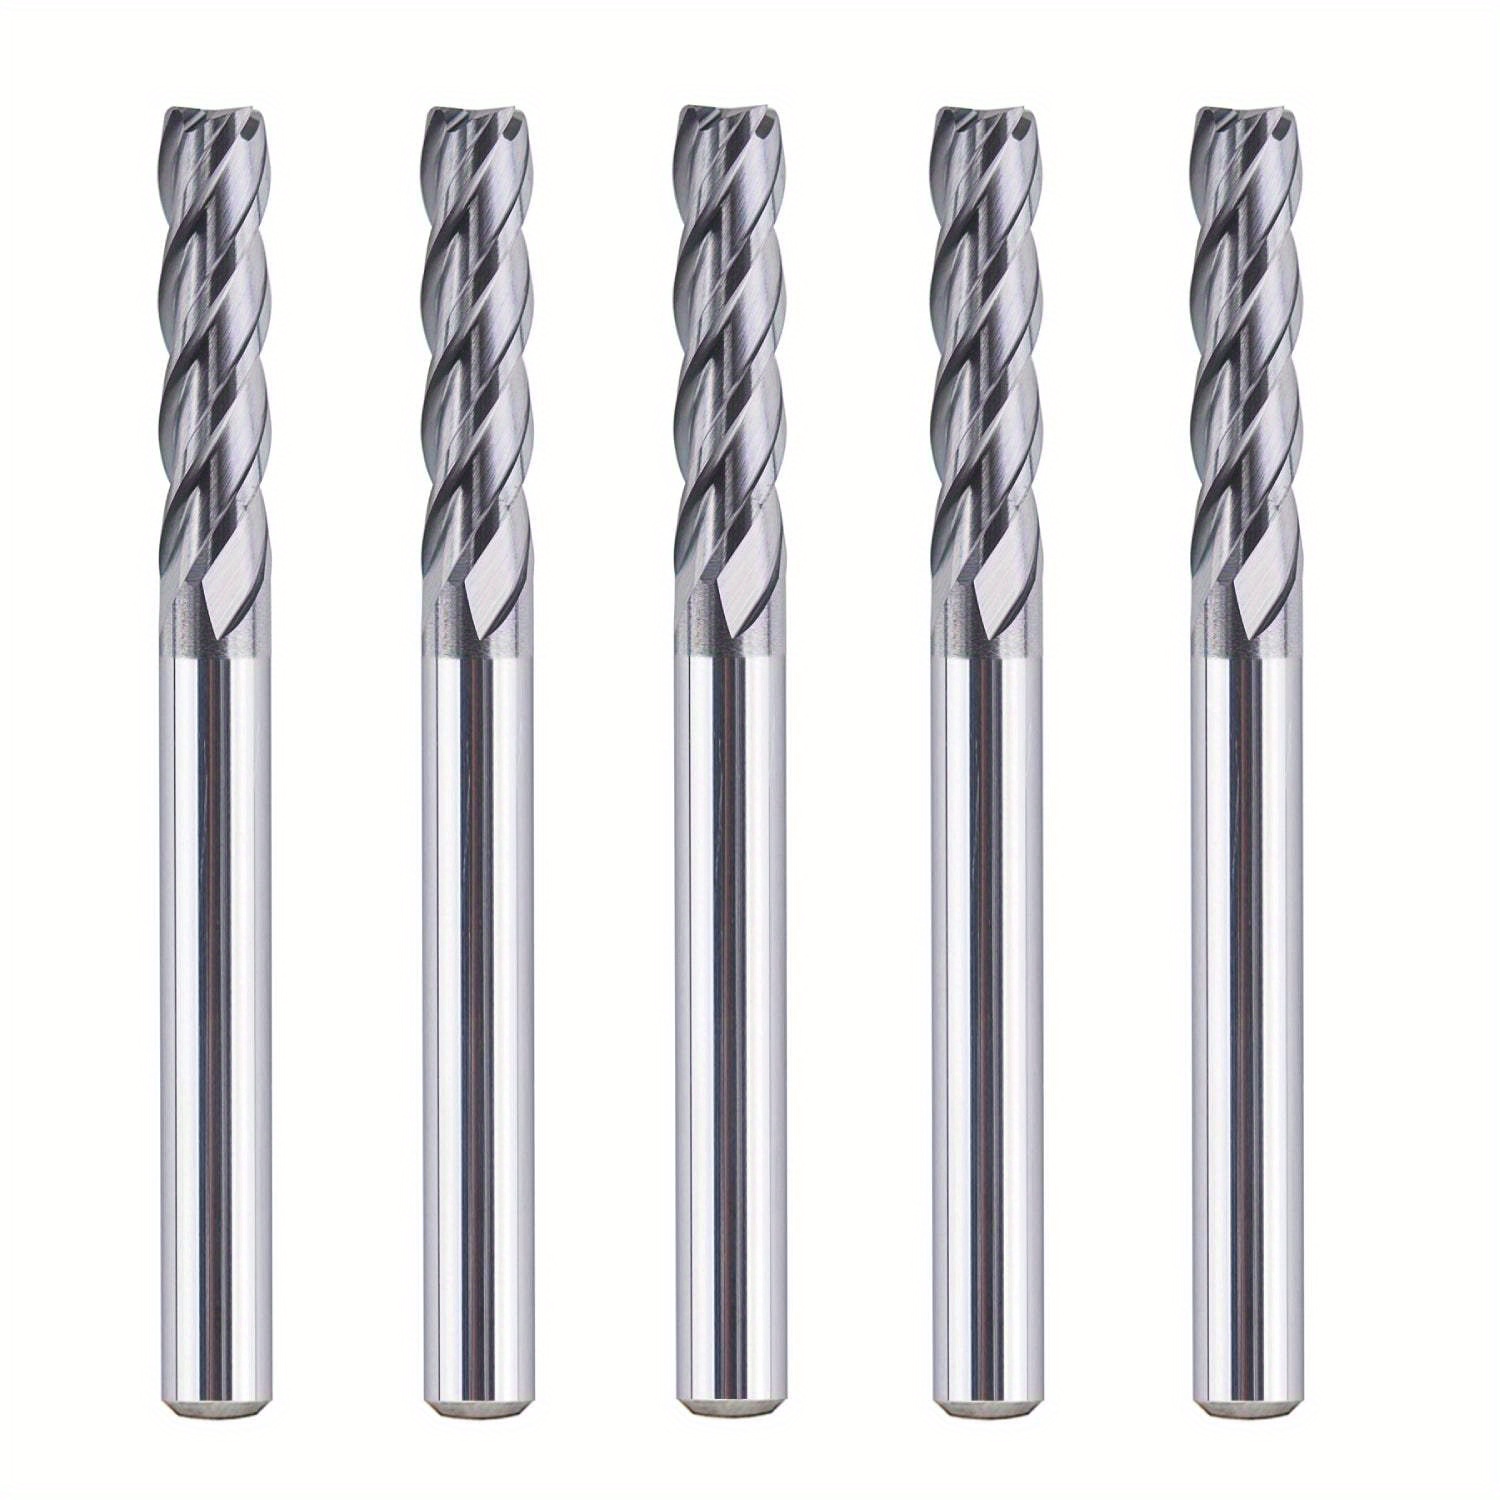 

Spetool M03011 5pcs Cnc Sc Spiral For Steel, Stainless Steel With Tialn Coating 4-flute 1/8" Dia X 1/8" Shank X 1/2" Cutting Length X 1-1/2" Long Flat Top Up Cut End Mills